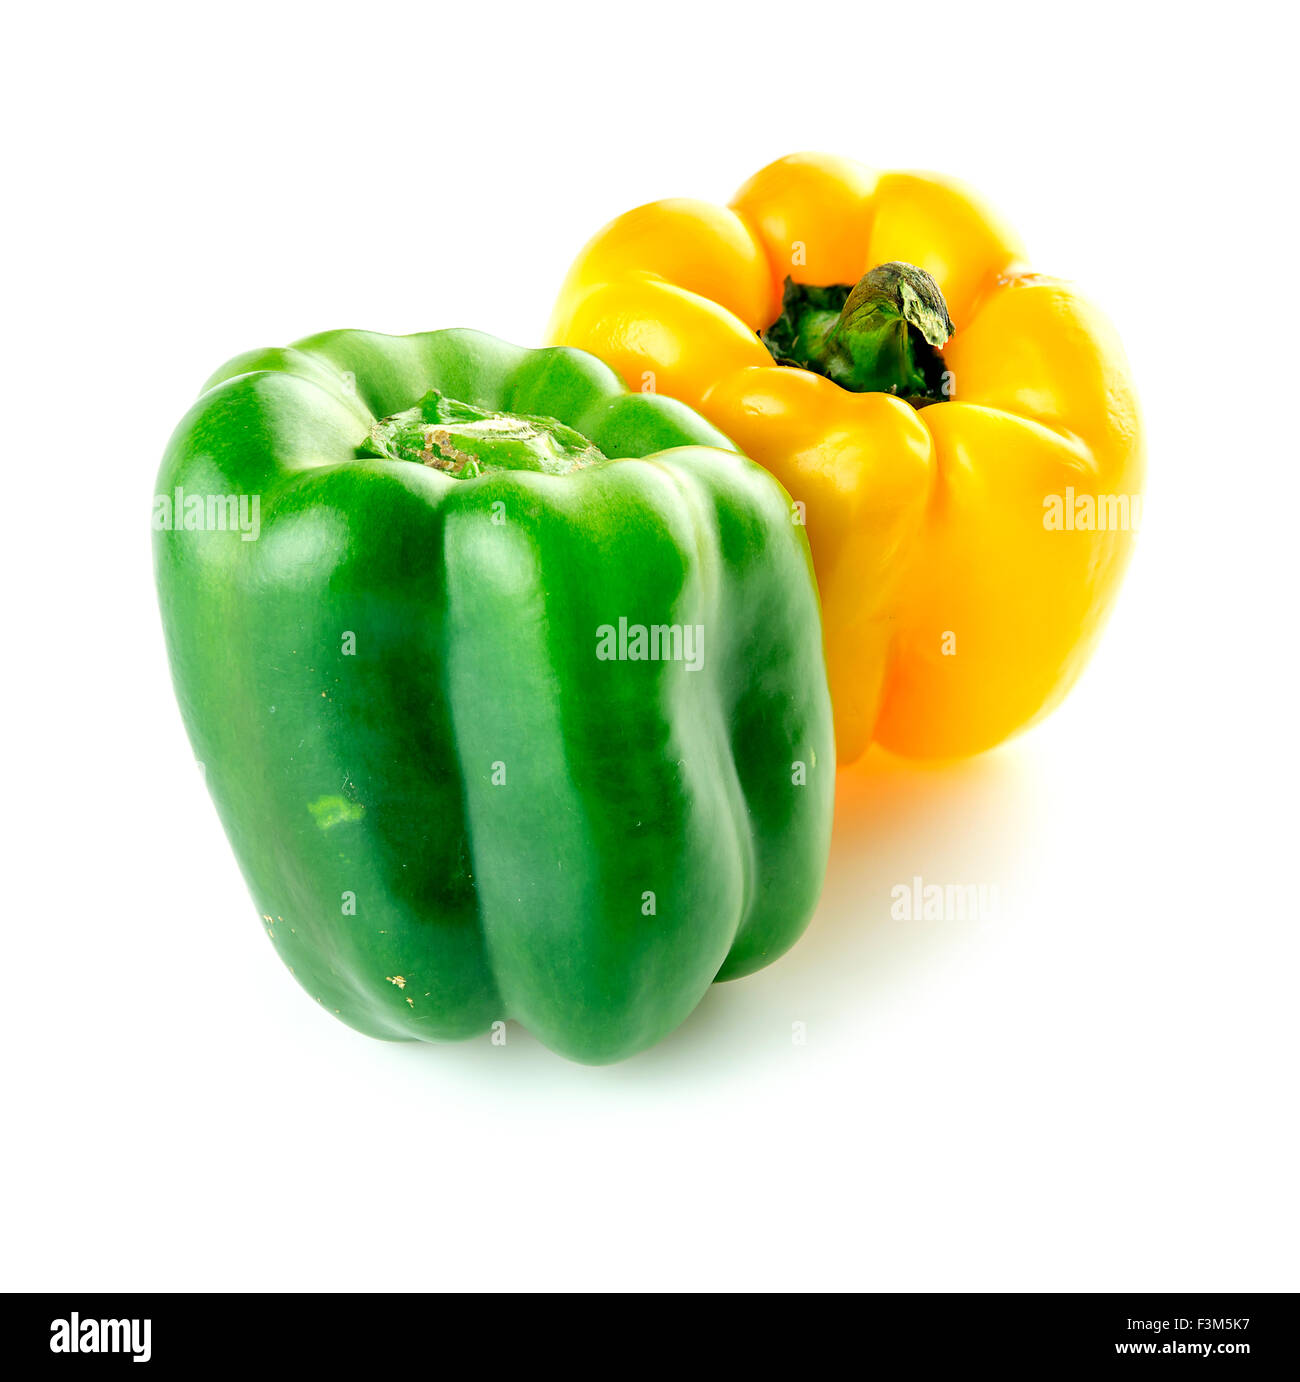 Yellow and green peppers isolated Stock Photo